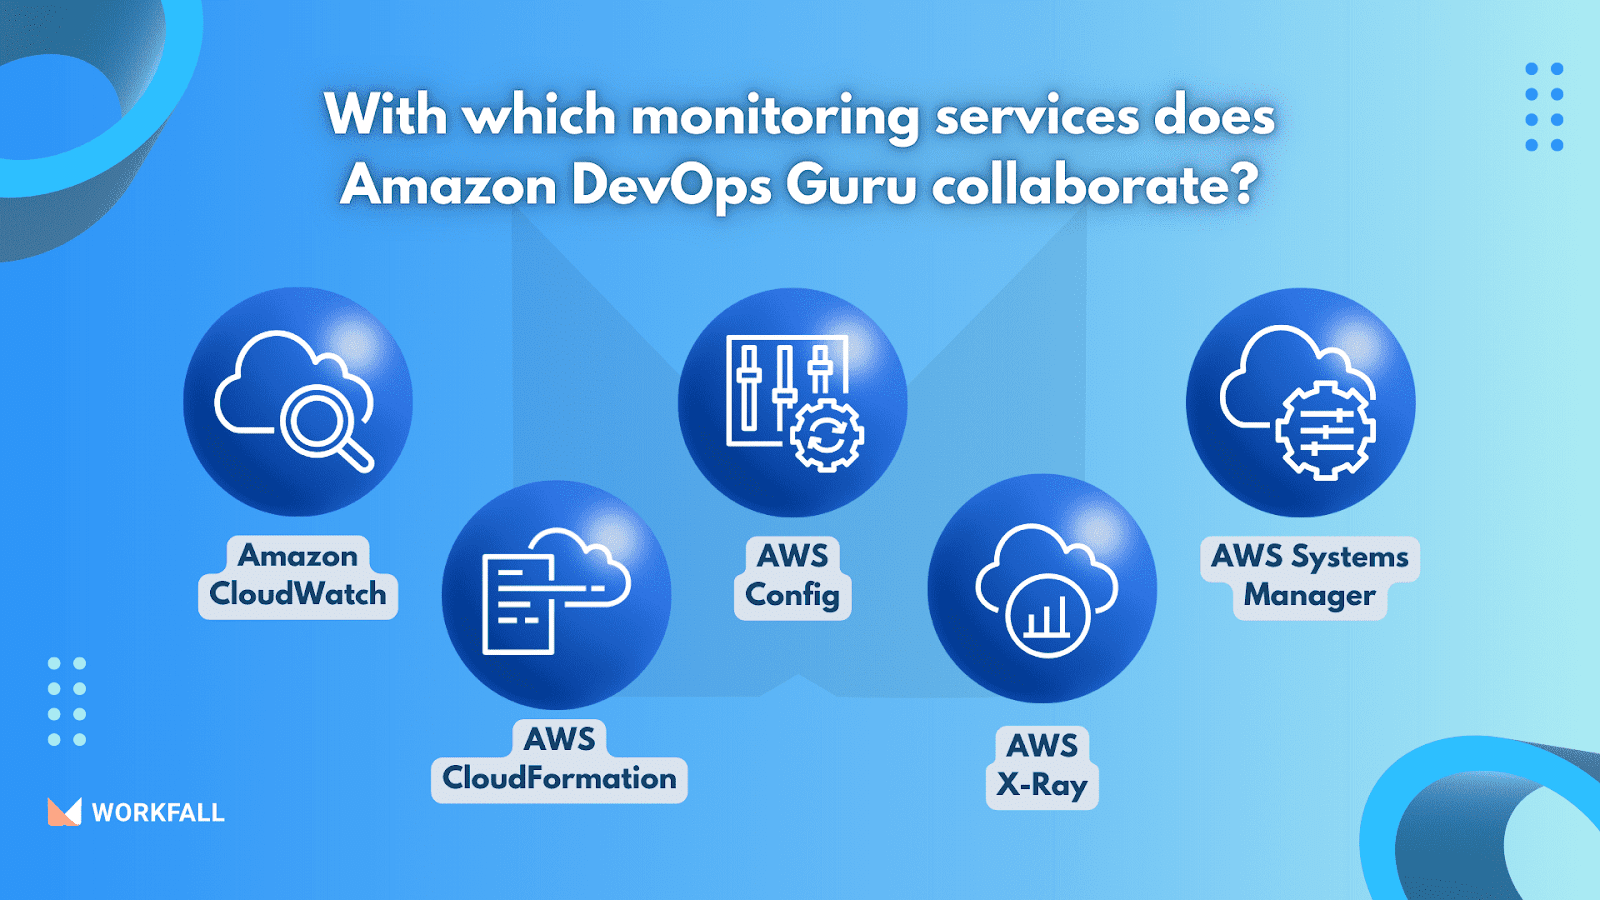 With which monitoring services does Amazon DevOps Guru collaborate?